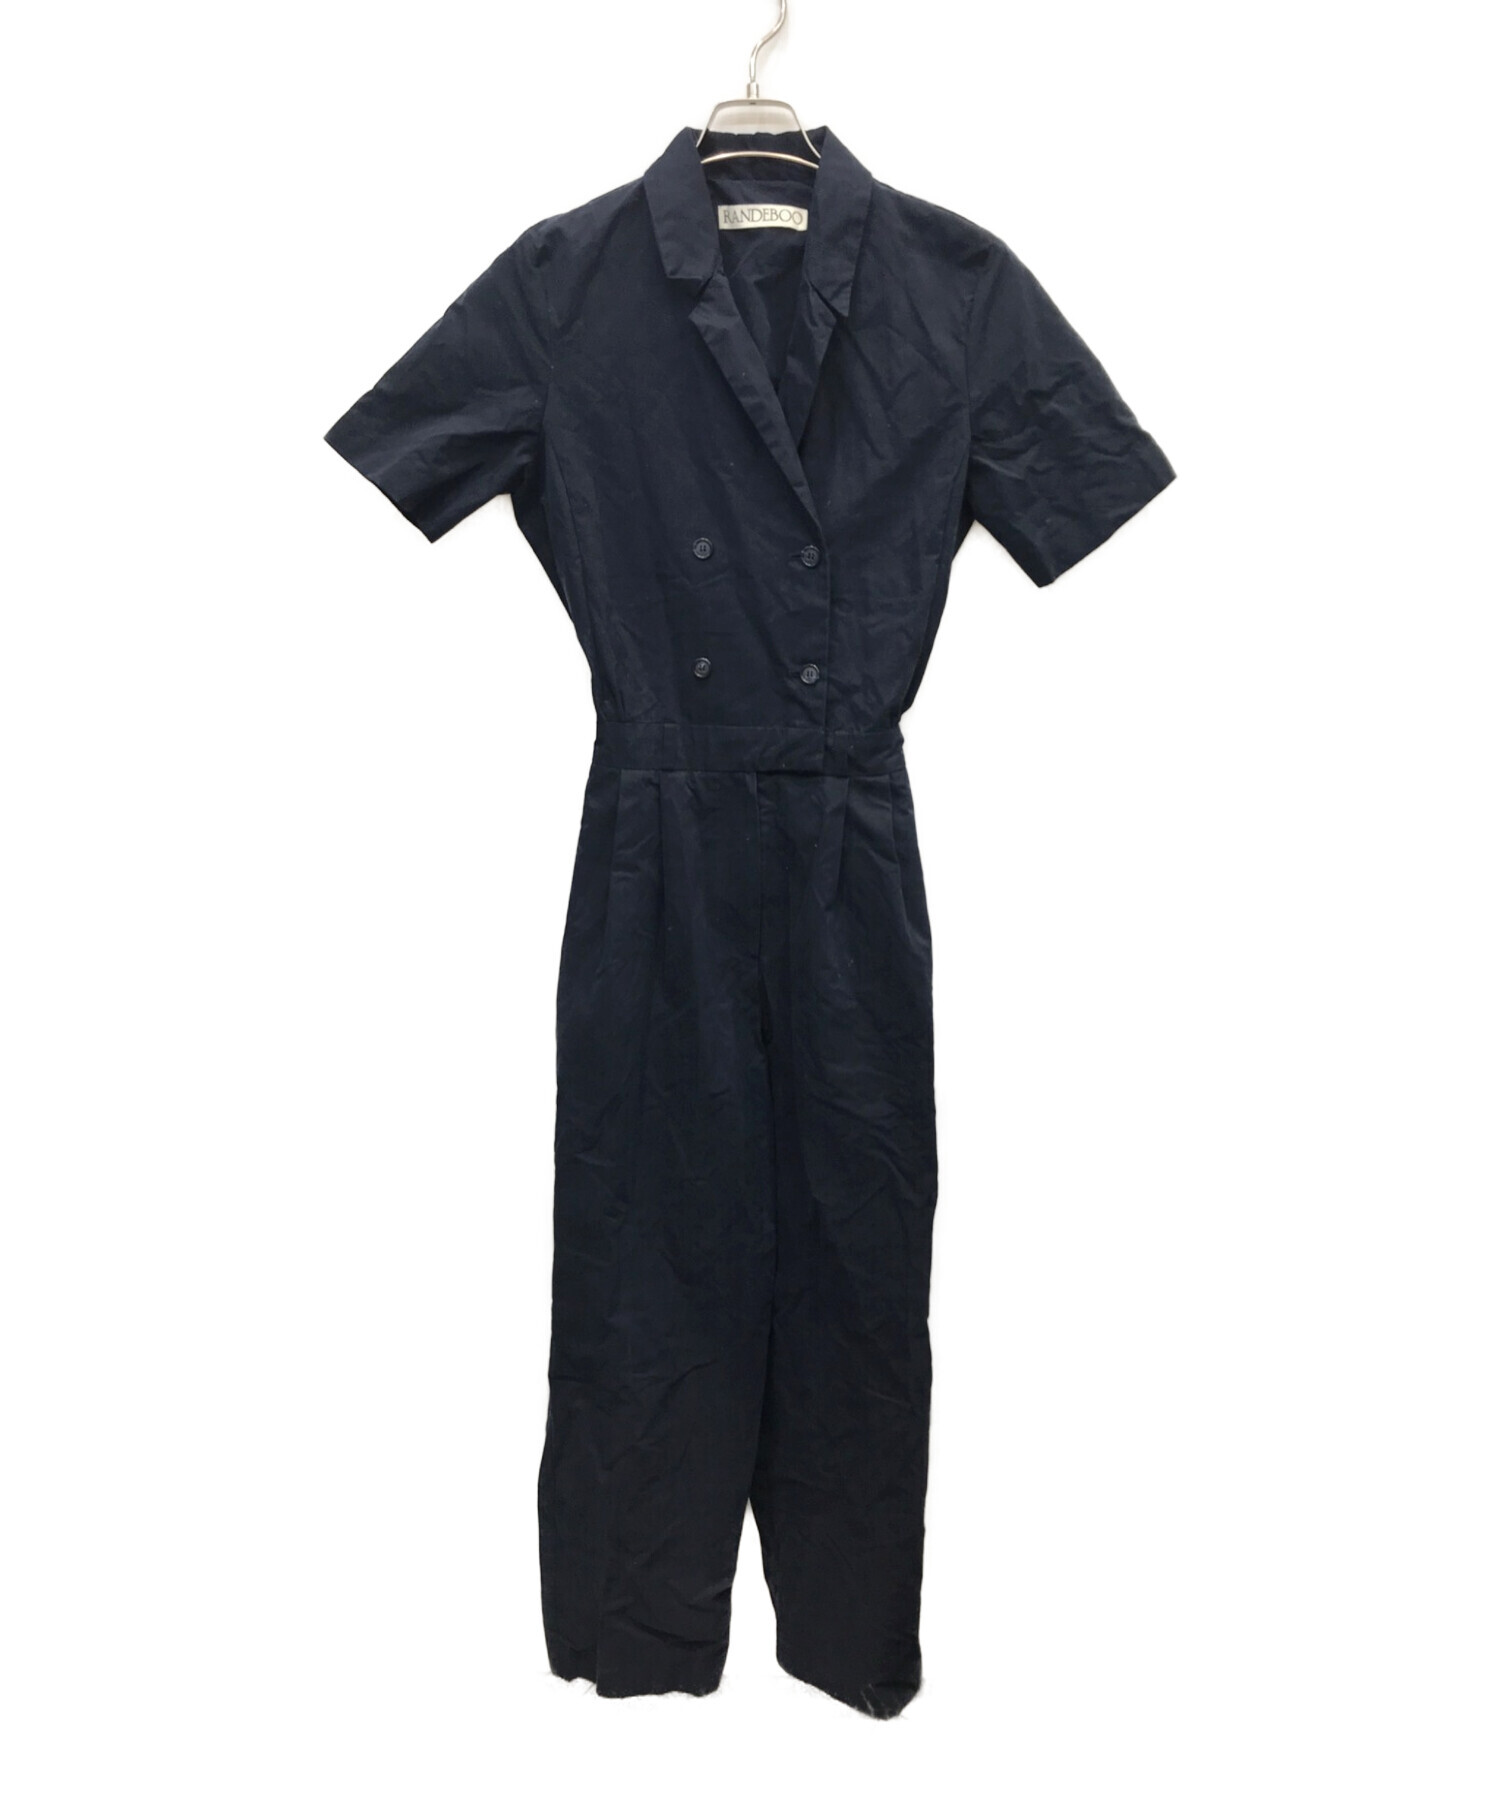 RANDEBOO ランデブー double jumpsuits